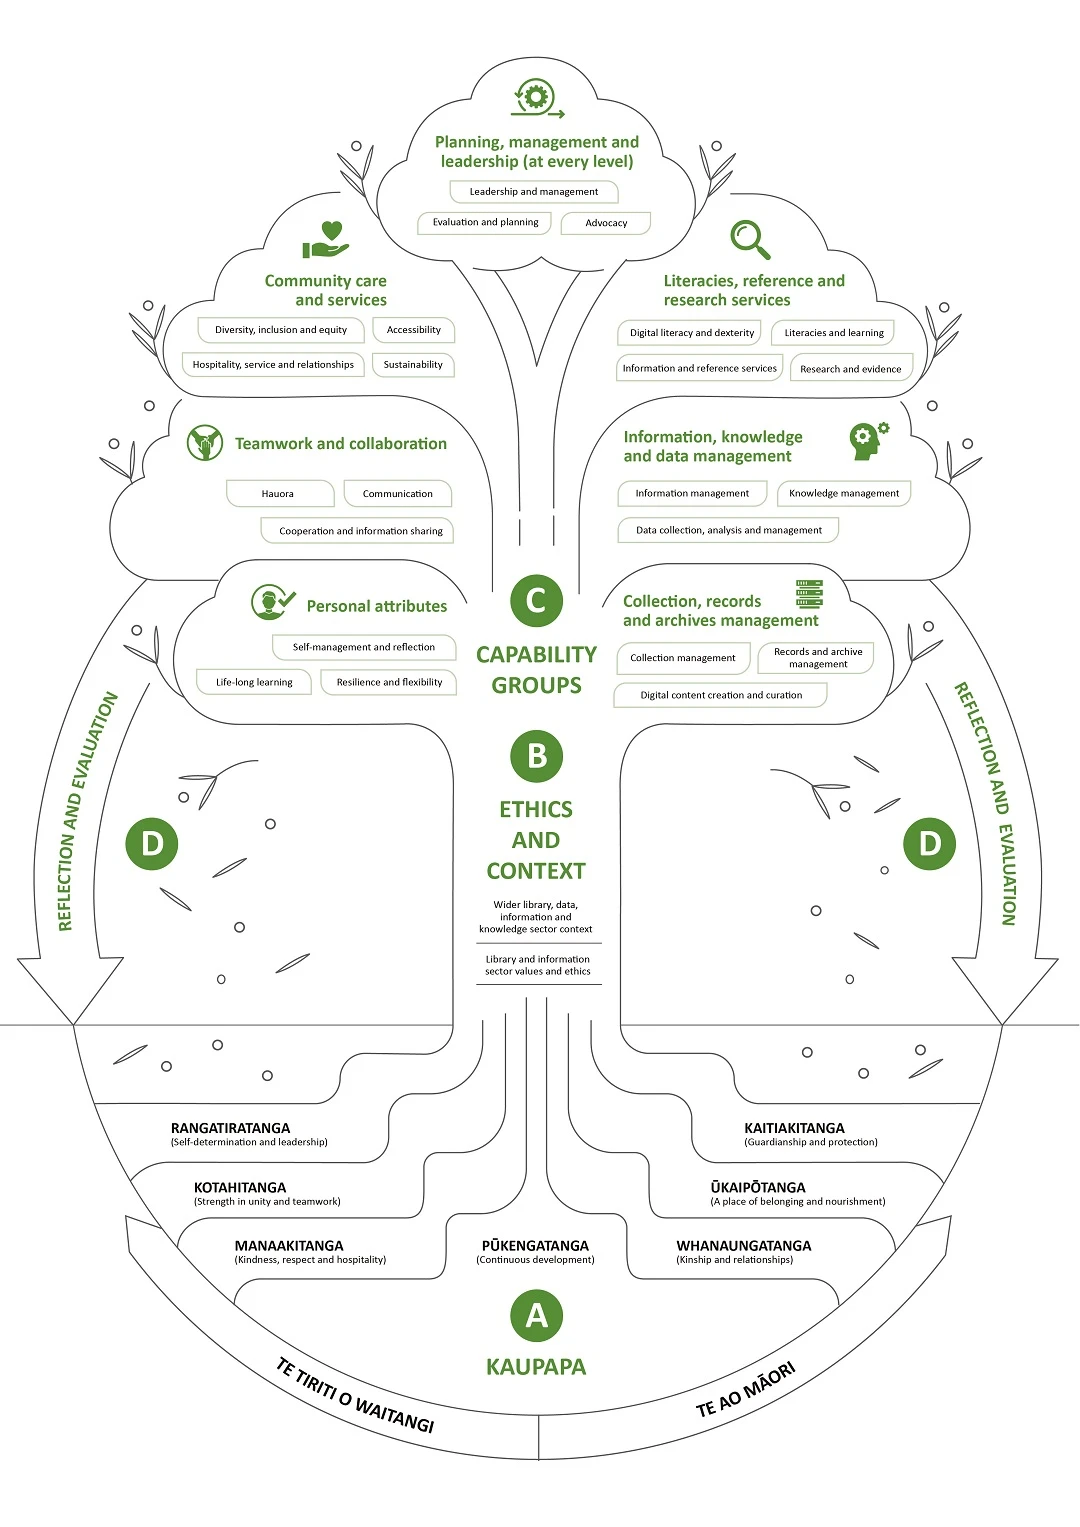 Infographic showing elements of the Te Tōtara capability framework, represented as different parts of a tree.
Includes the following elements: "kaupapa", "ethics and context", "capability groups", and "reflection and evaluation".
Long description below.